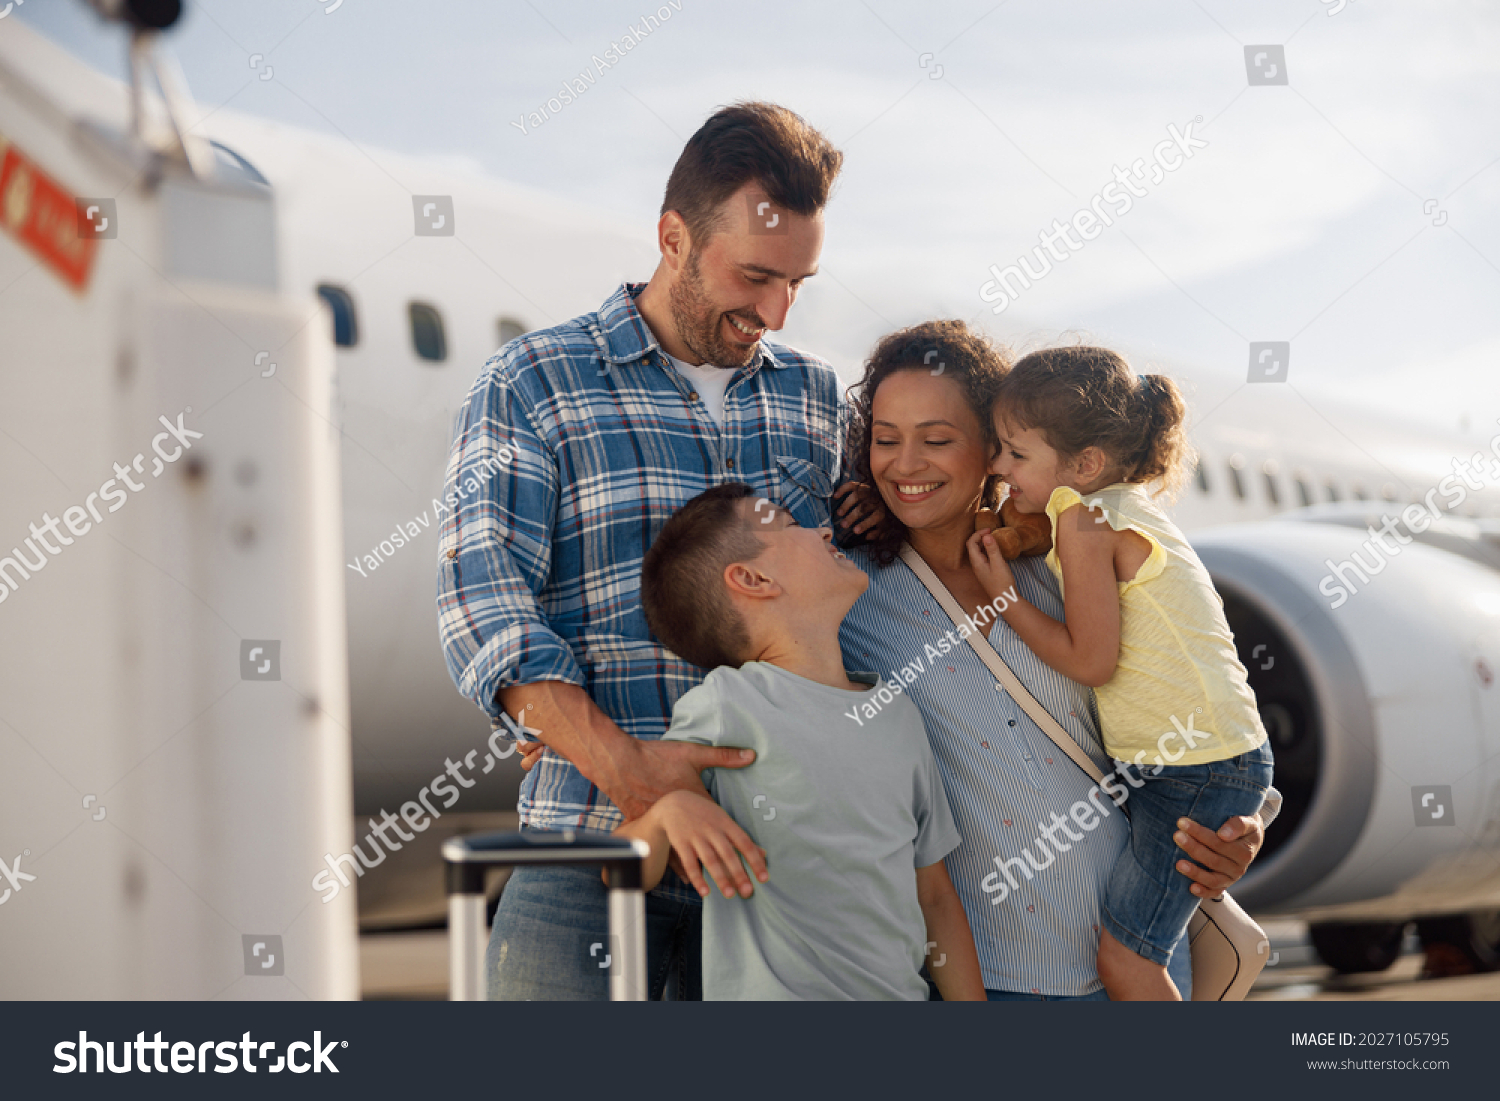 Family of four looking excited while going on a trip, standing in front of big airplane outdoors. People, traveling, vacation concept #2027105795